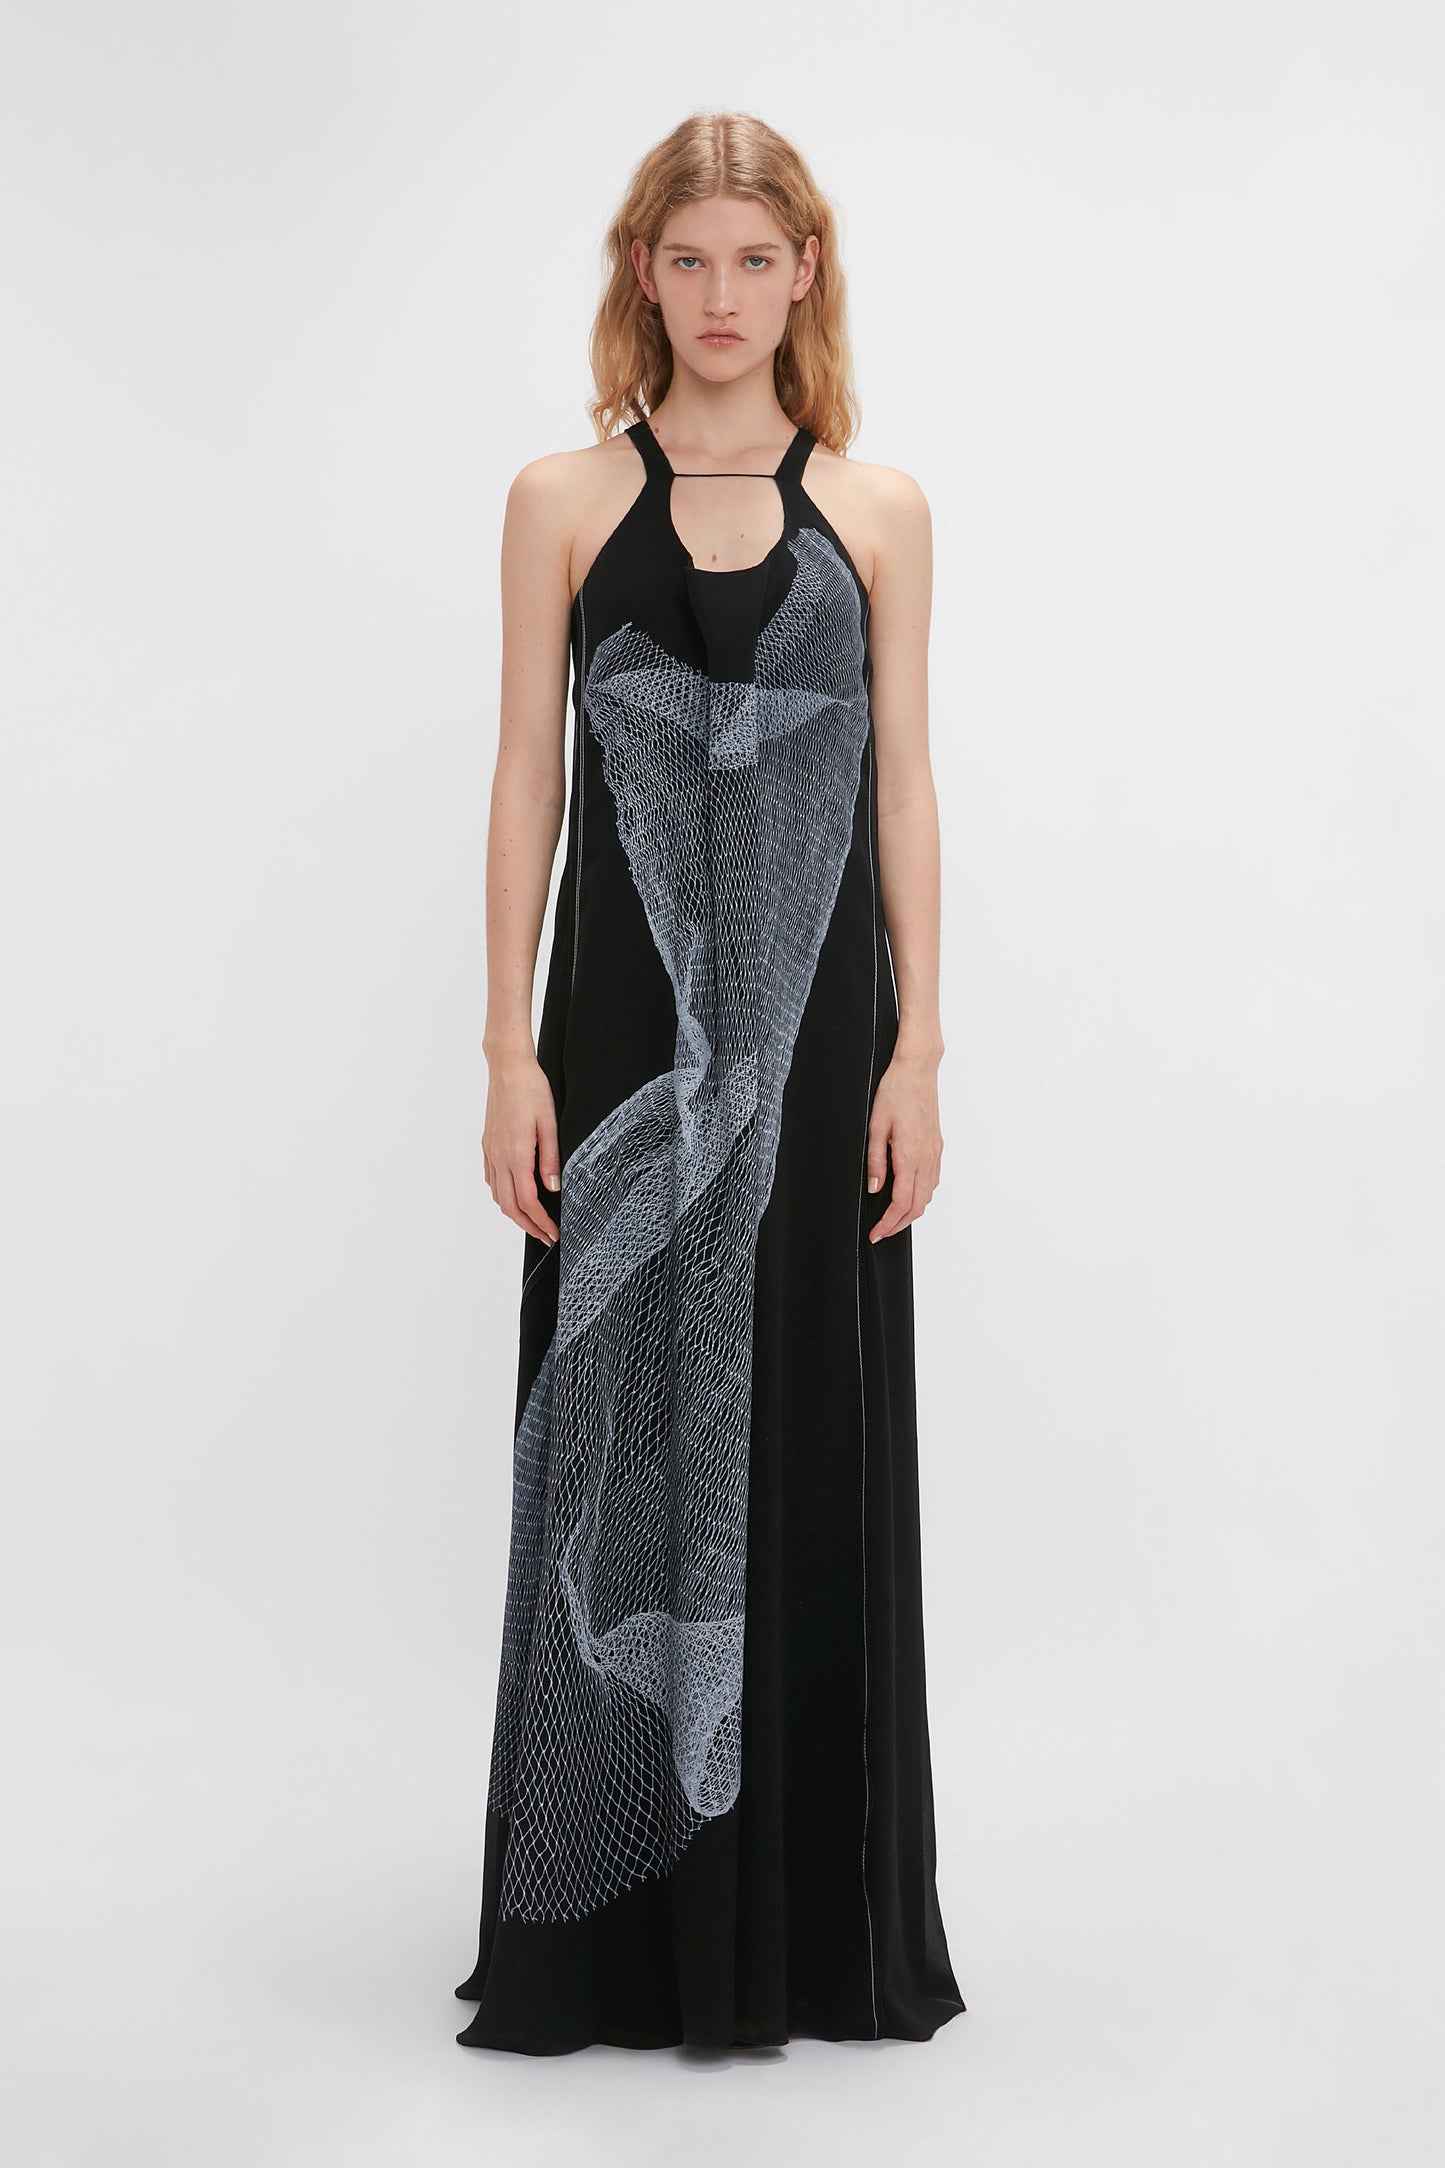 Sheer Cami Gown In Black-White Contorted Net